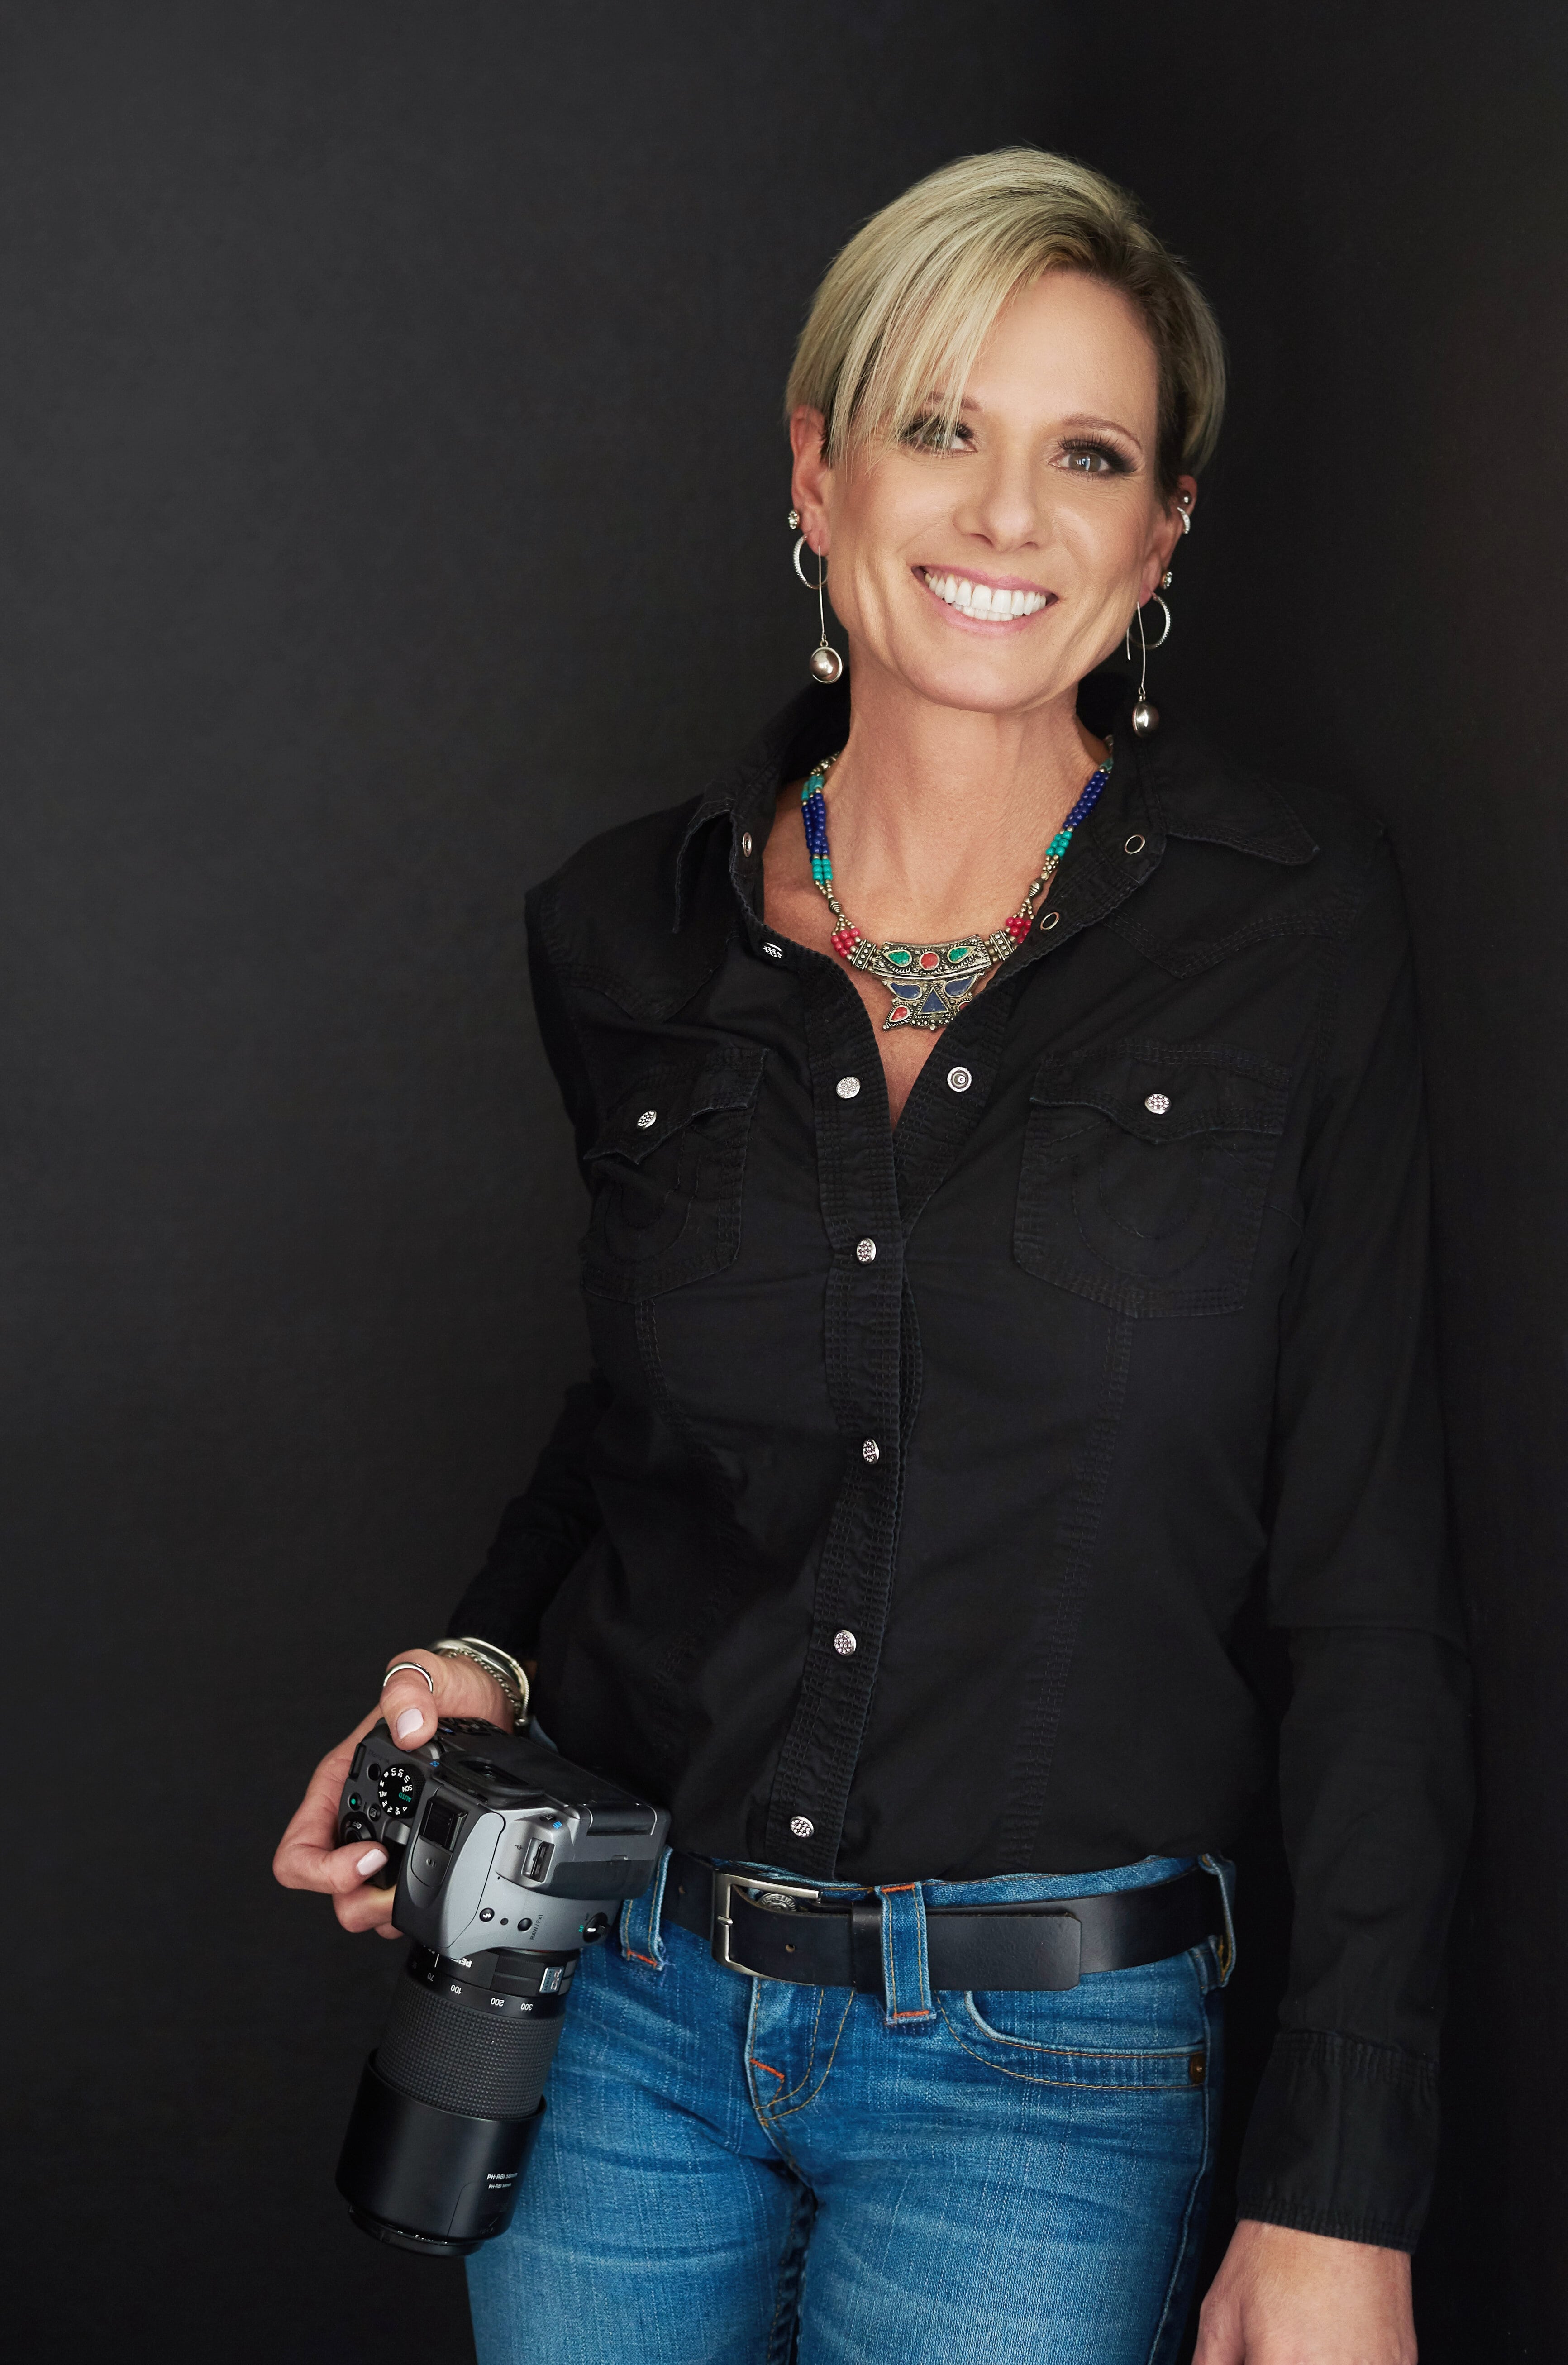 Beautiful smiling white woman photographer with short blonde hair wearing a black top, turquoise necklace, and holding a camera